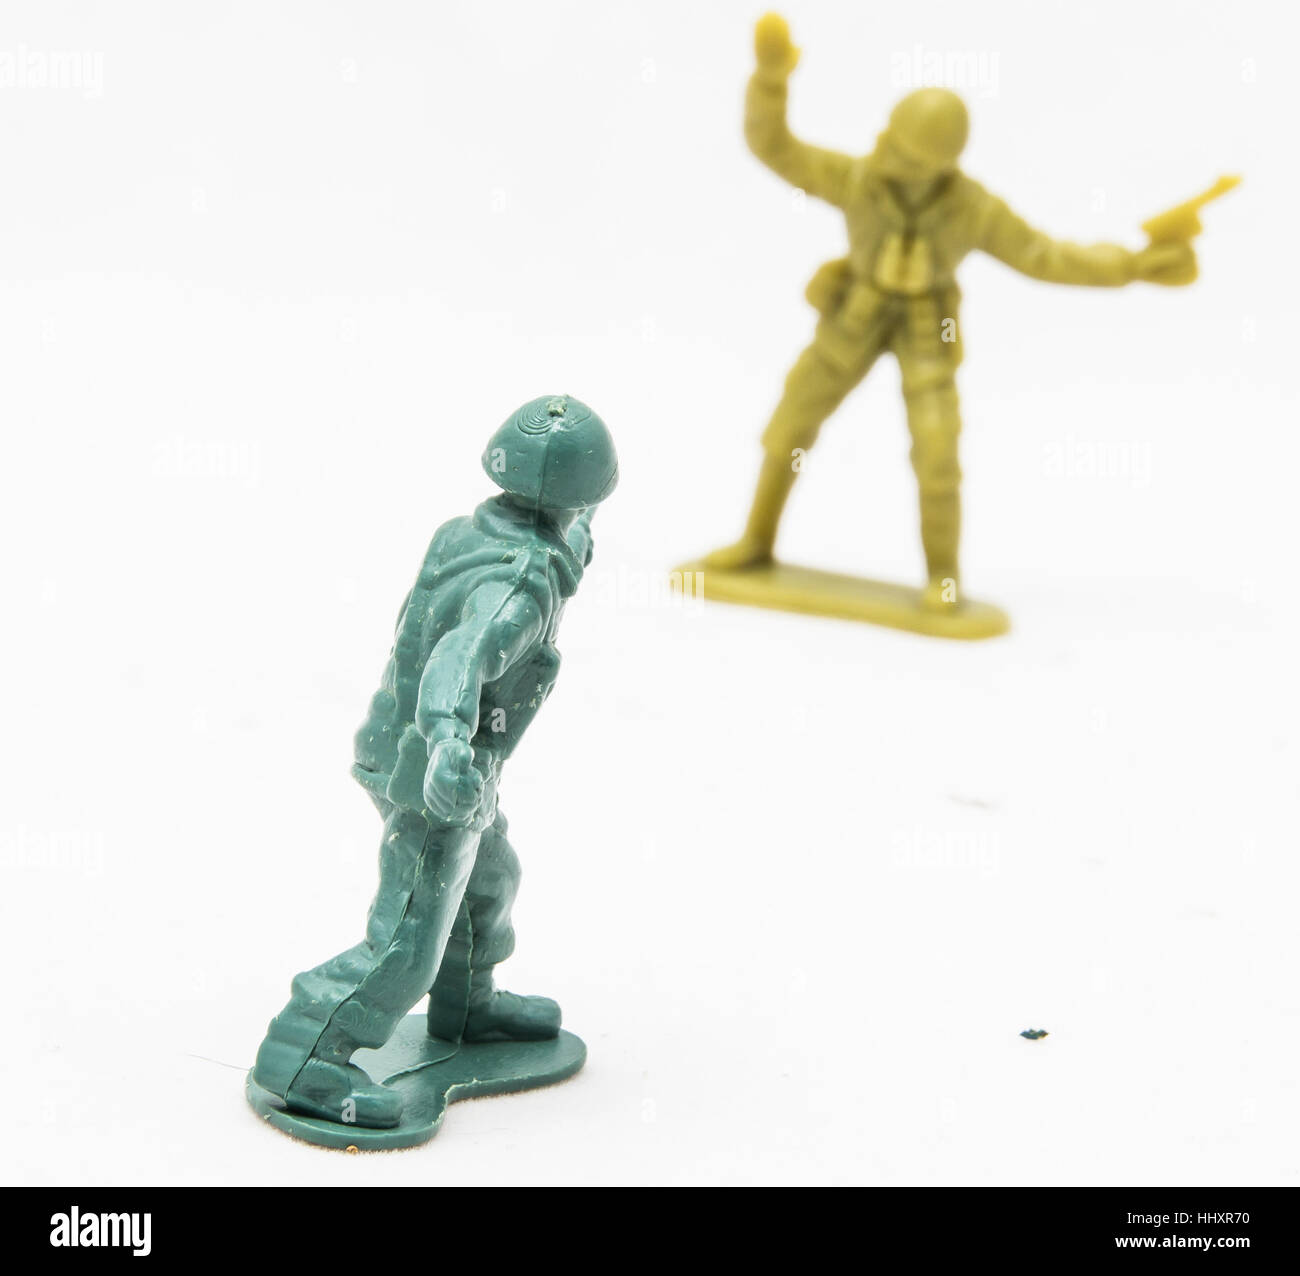 Two plastic toy soldiers Stock Photo